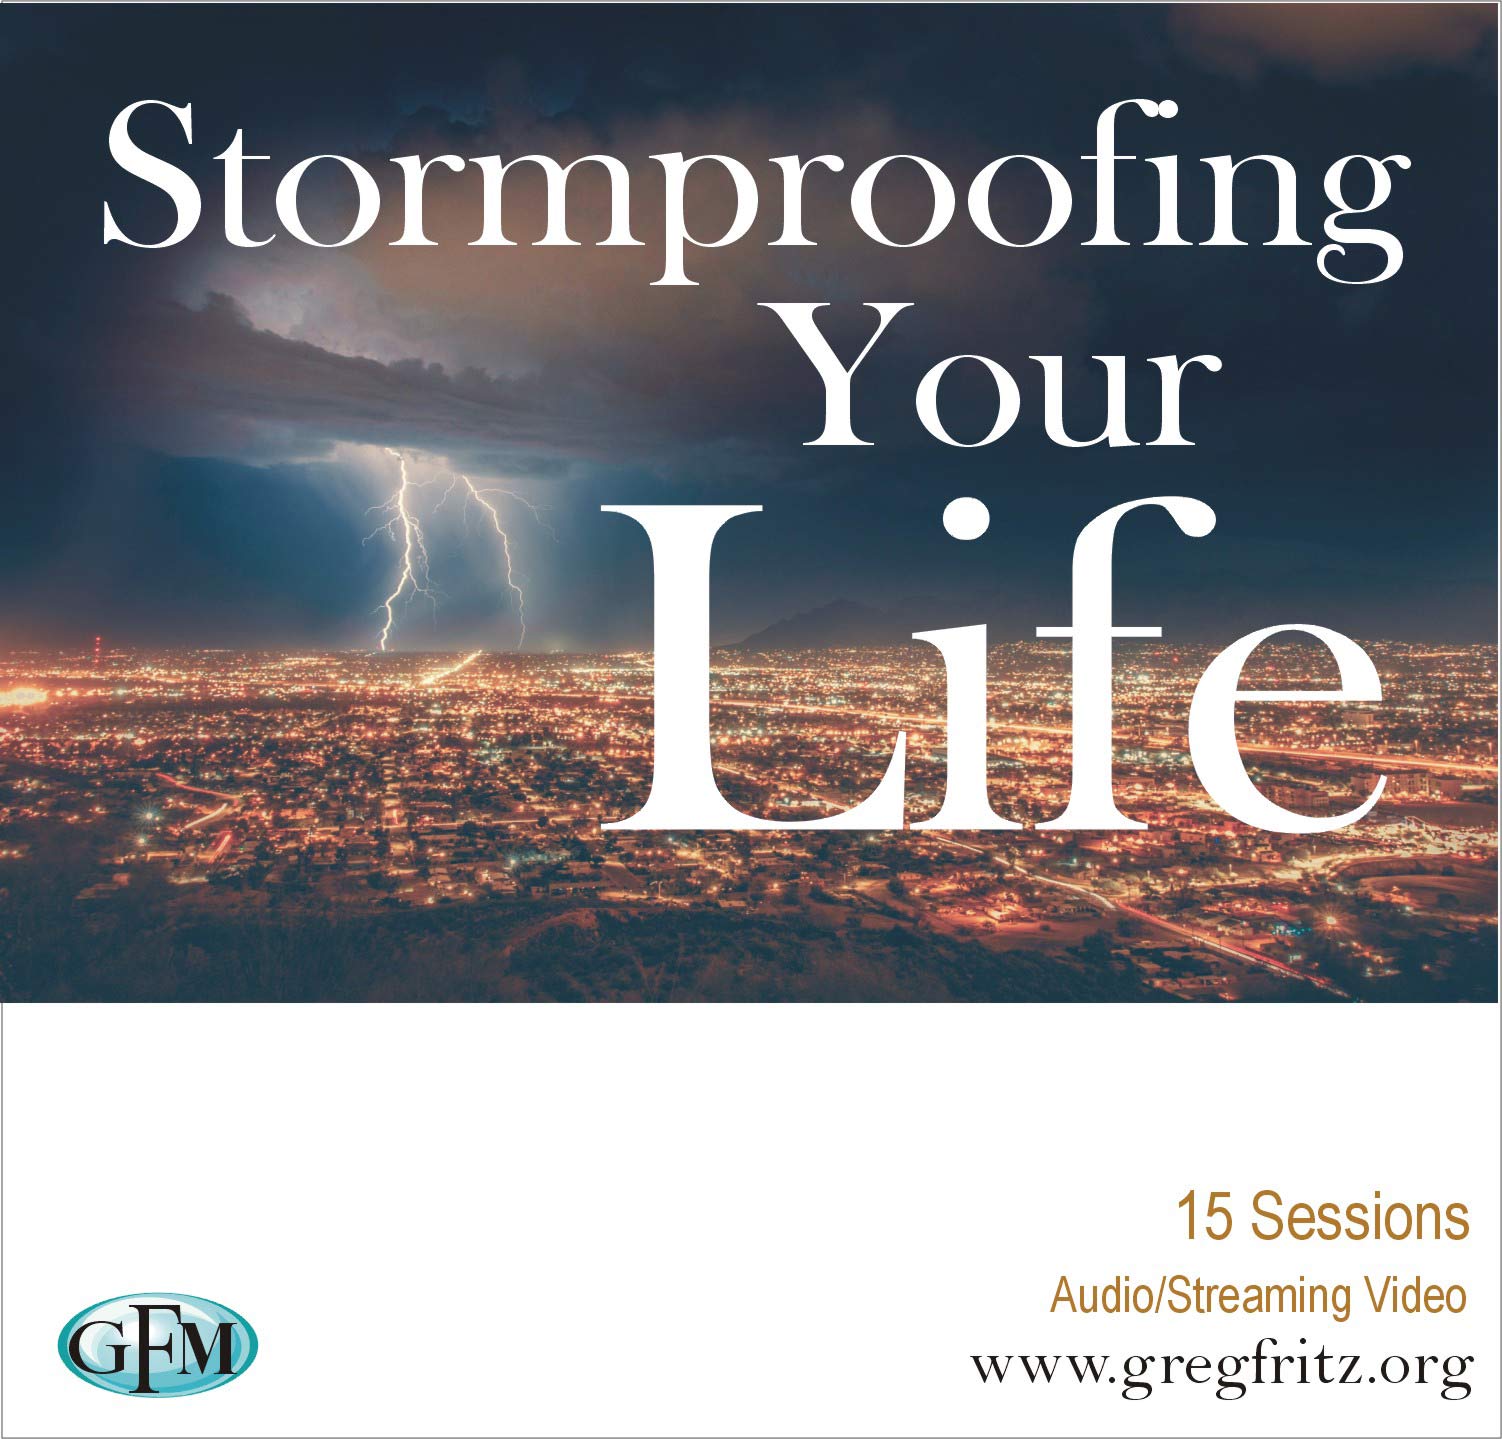 Stormproofing Your Life MP3s and Streaming Video